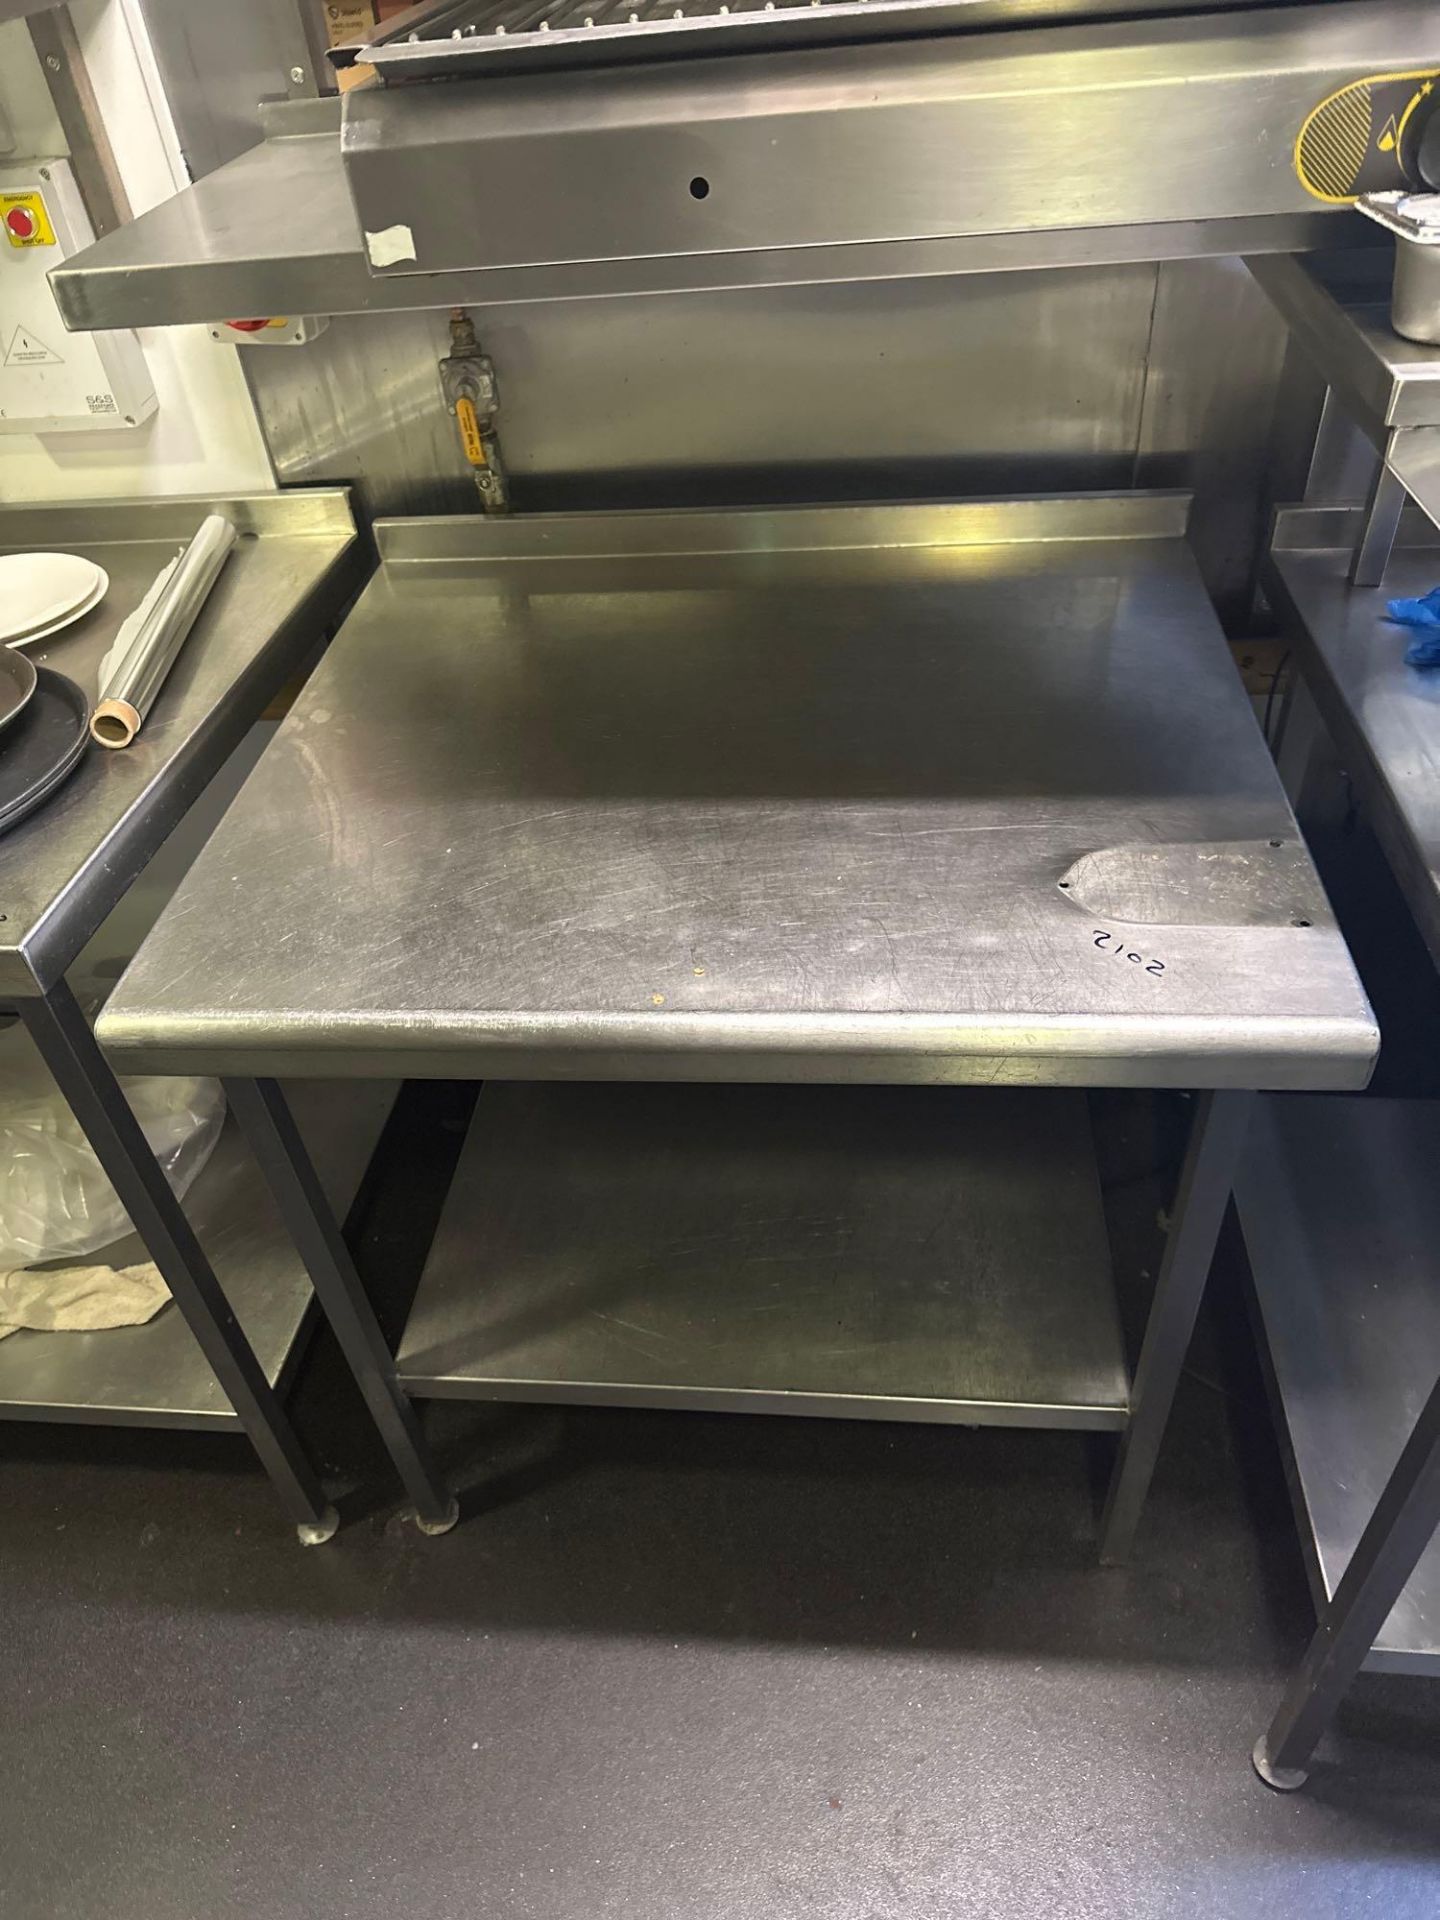 Stainless Steel Preparation Table With Undershelf And upstand 80 x 90 x 90cm ( Location: Upstairs